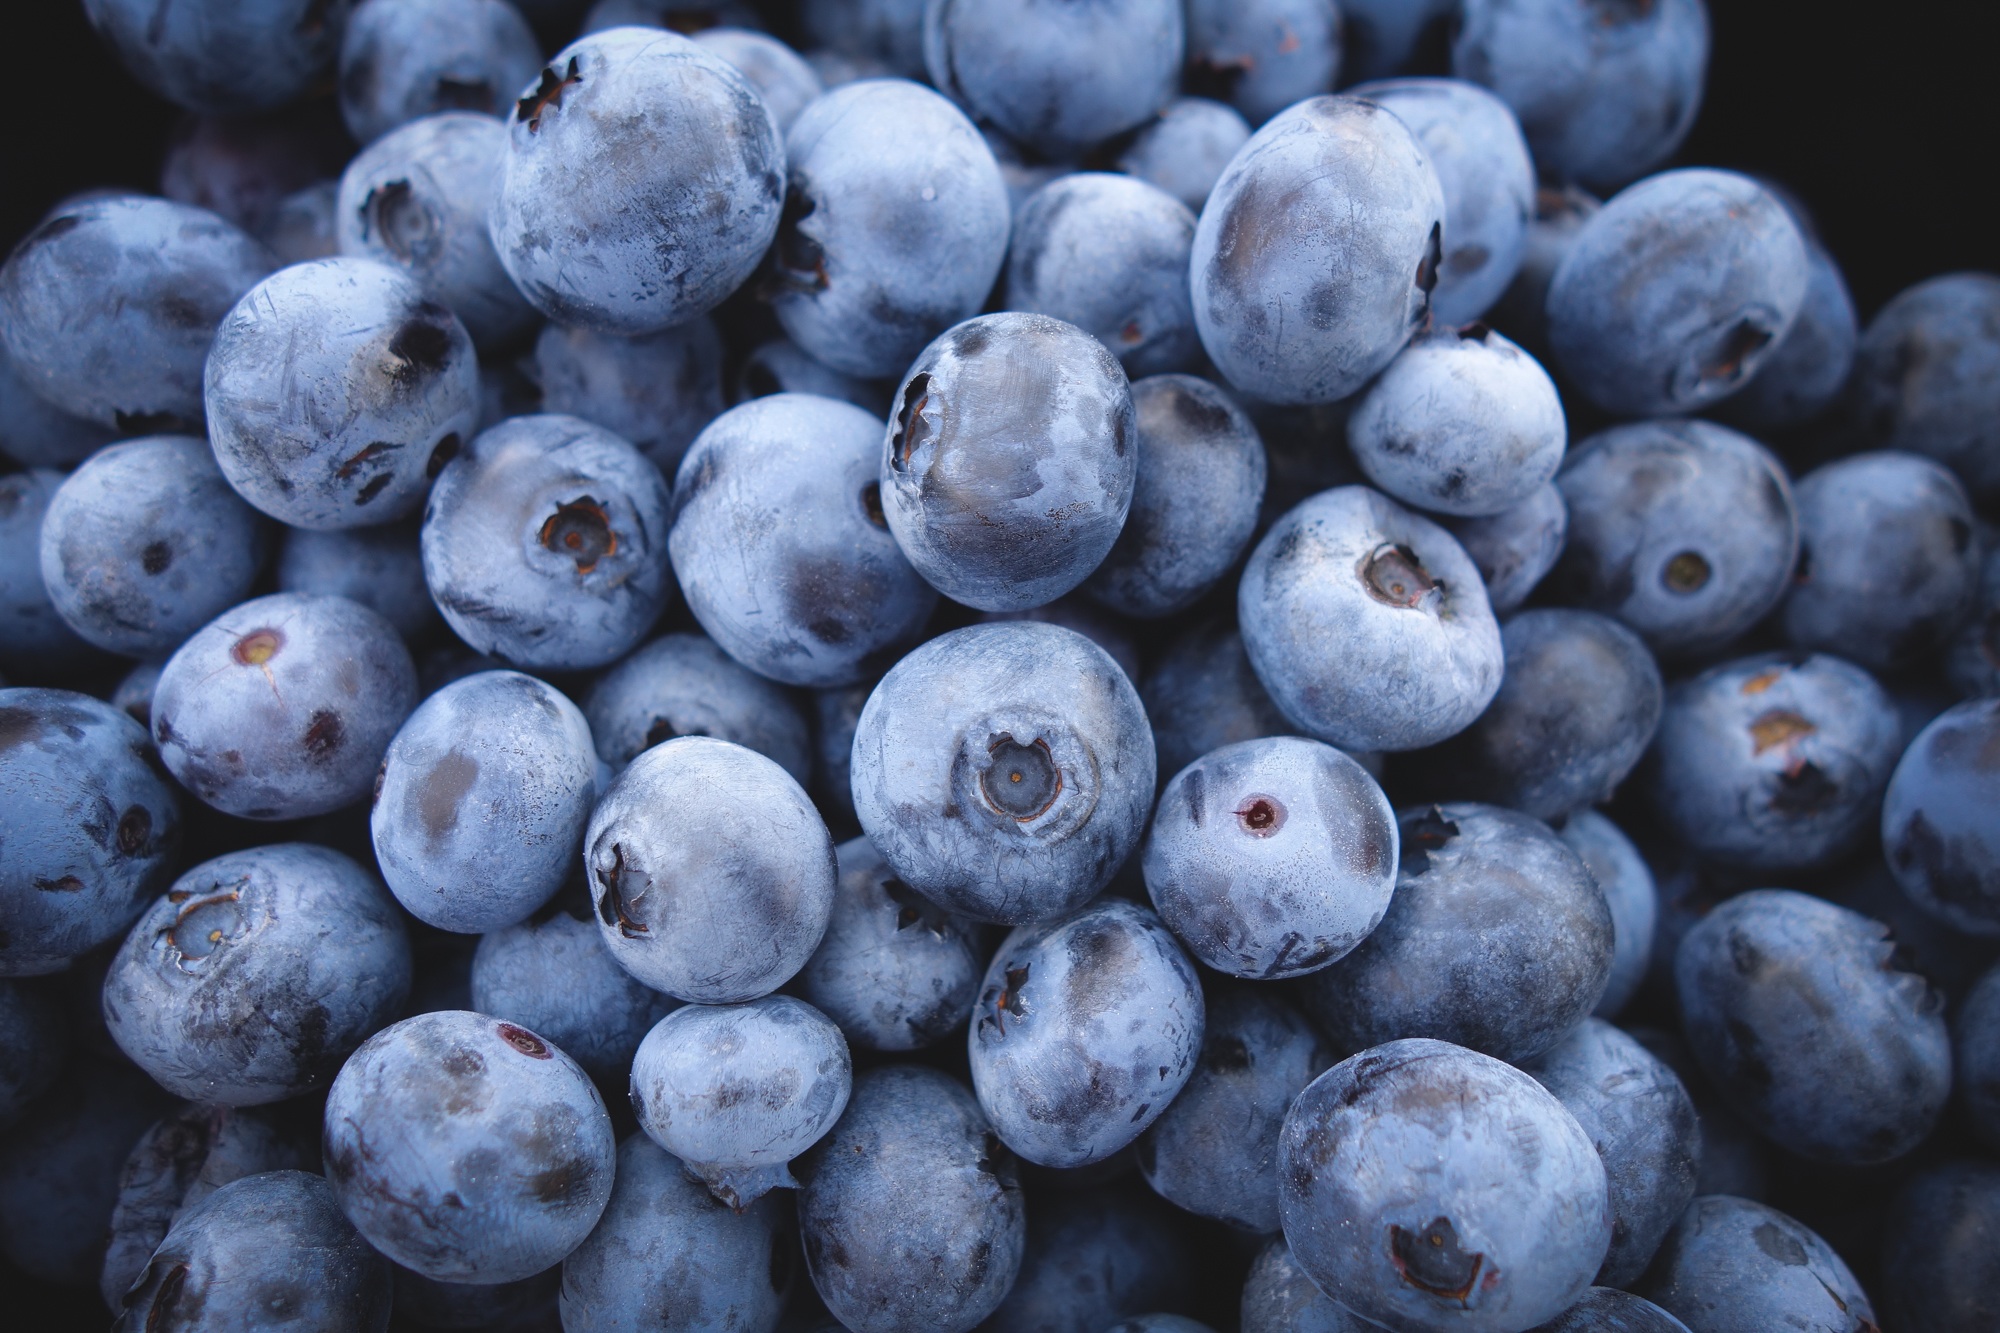 All about blueberries in Latin America